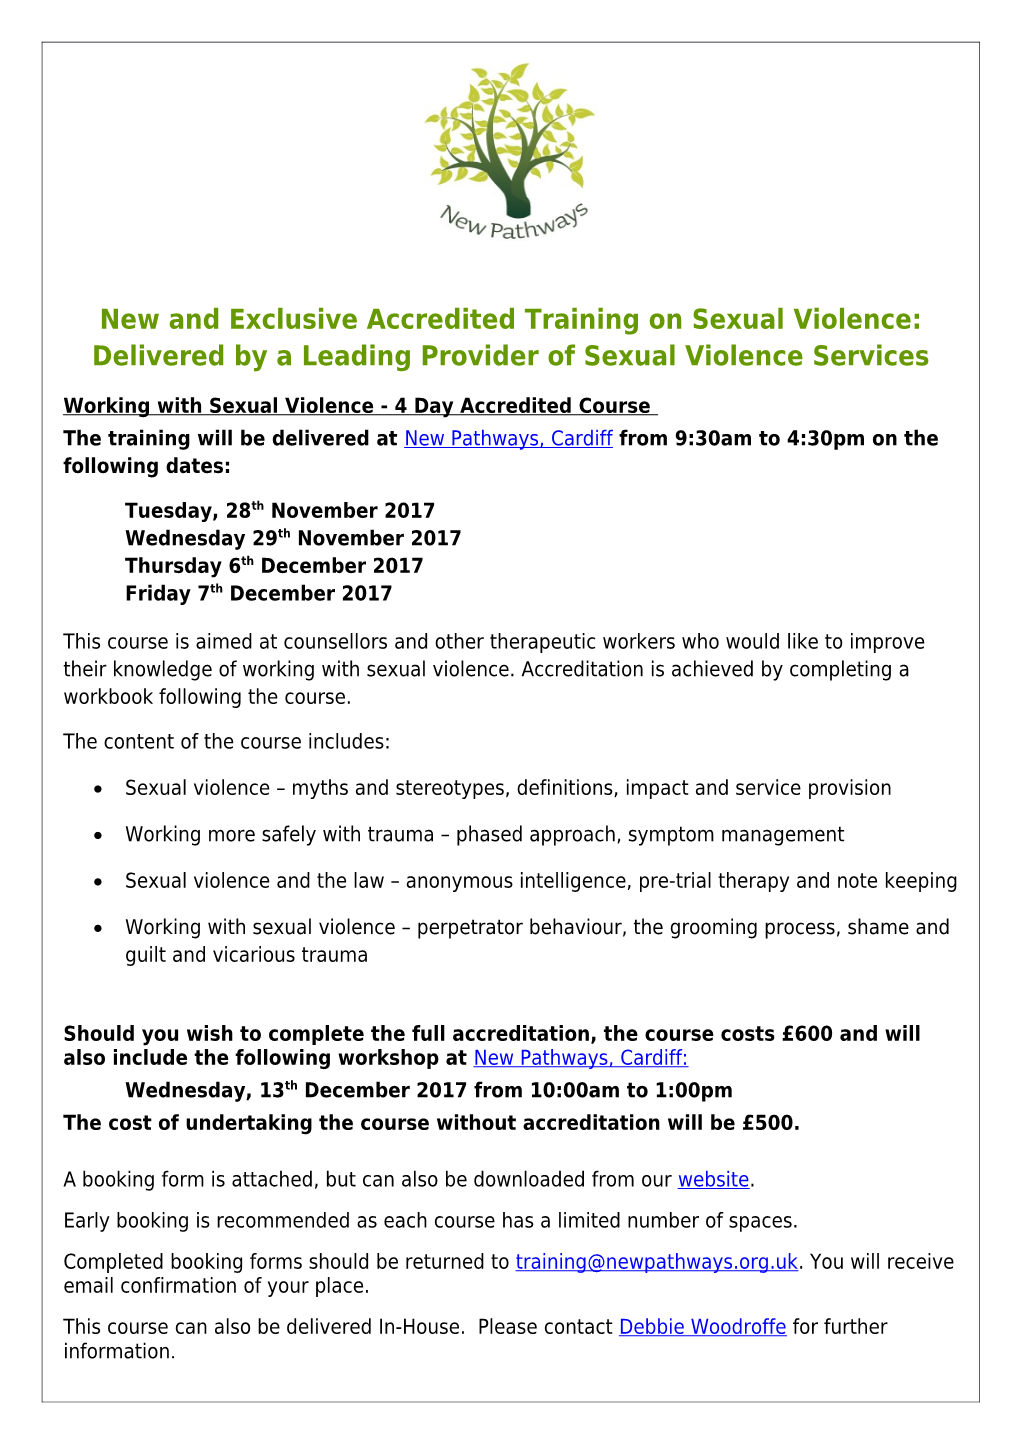 Working with Sexual Violence - 4 Day Accredited Course